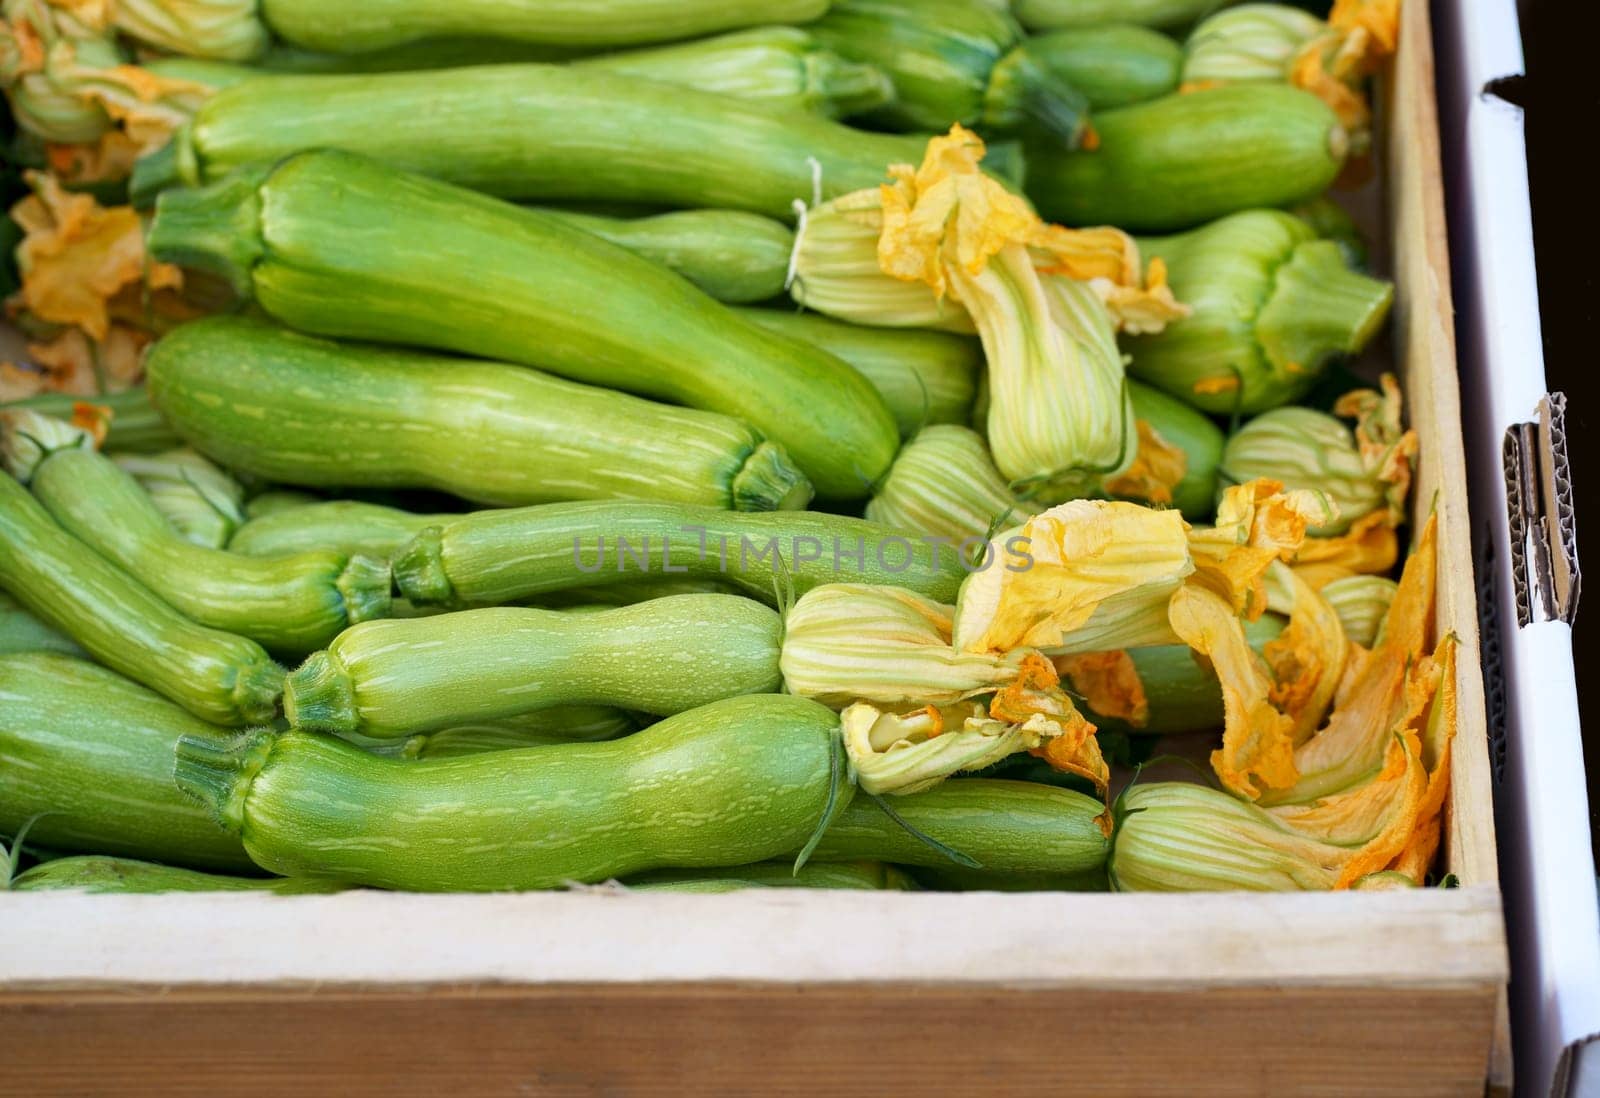 Nice. French market. Fresh zucchini with flowers sold at the market